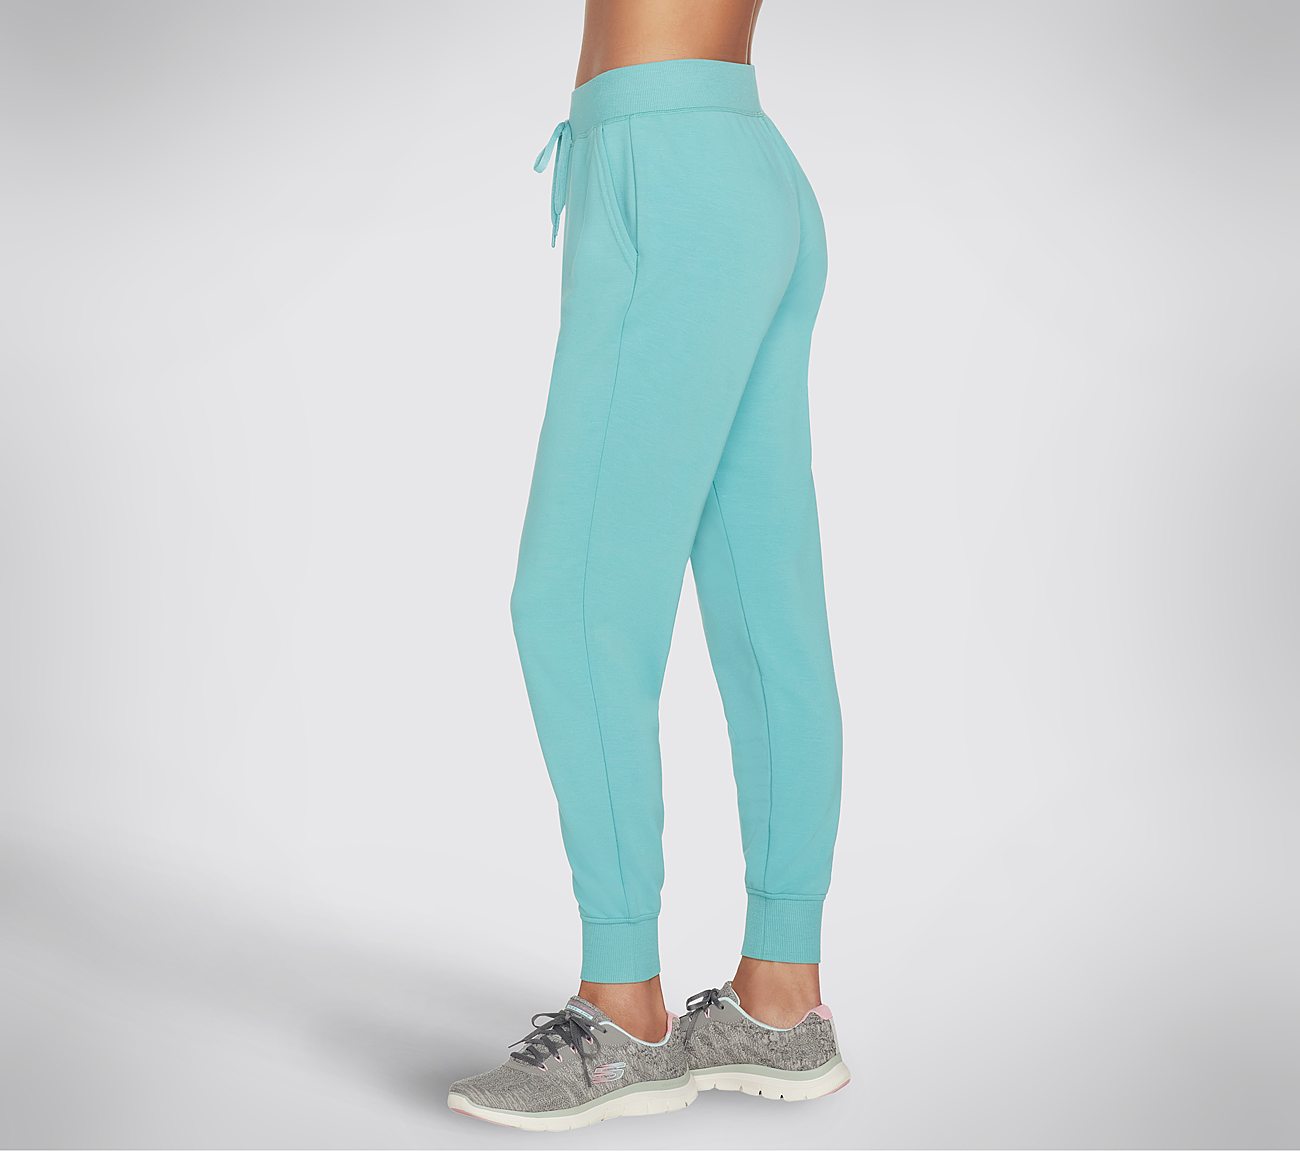 RESTFUL JOGGER, TURQUOISE Apparel Bottom View